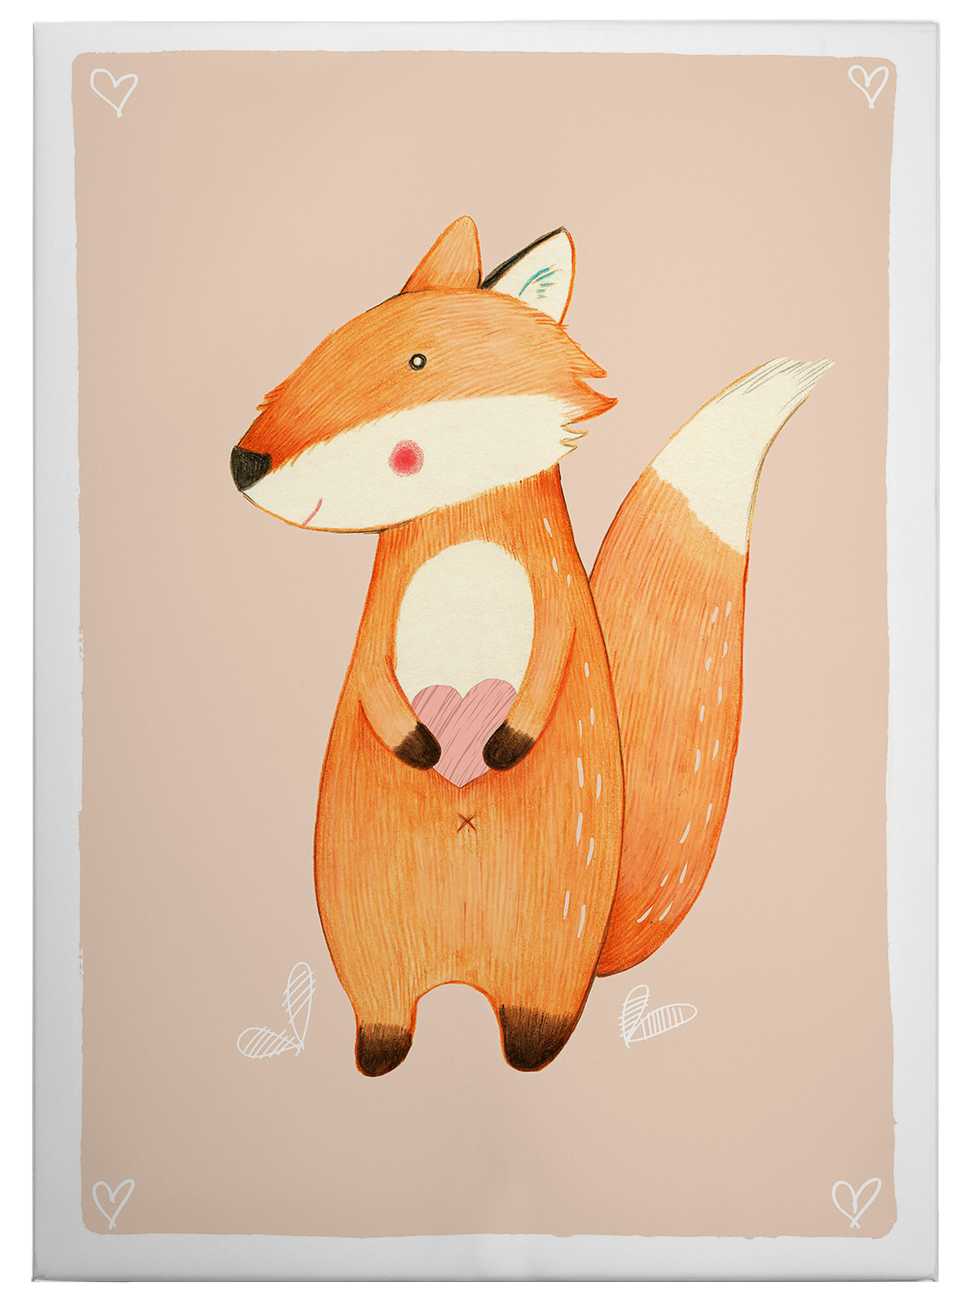             Canvas print fox with heart for the nursery, by Loske
        